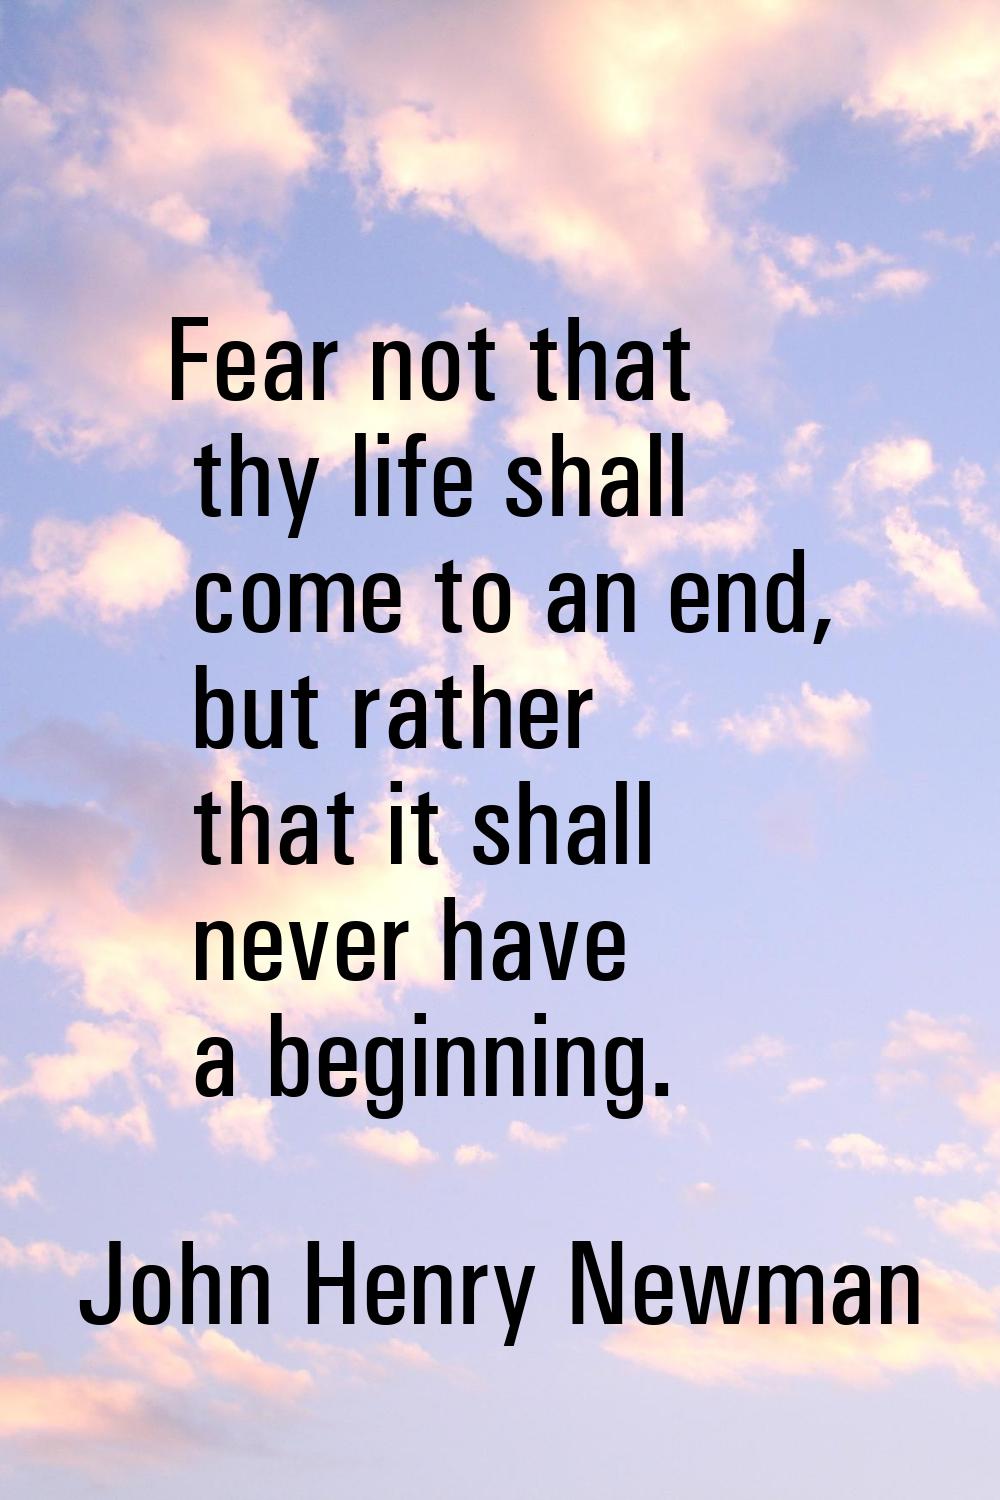 Fear not that thy life shall come to an end, but rather that it shall never have a beginning.